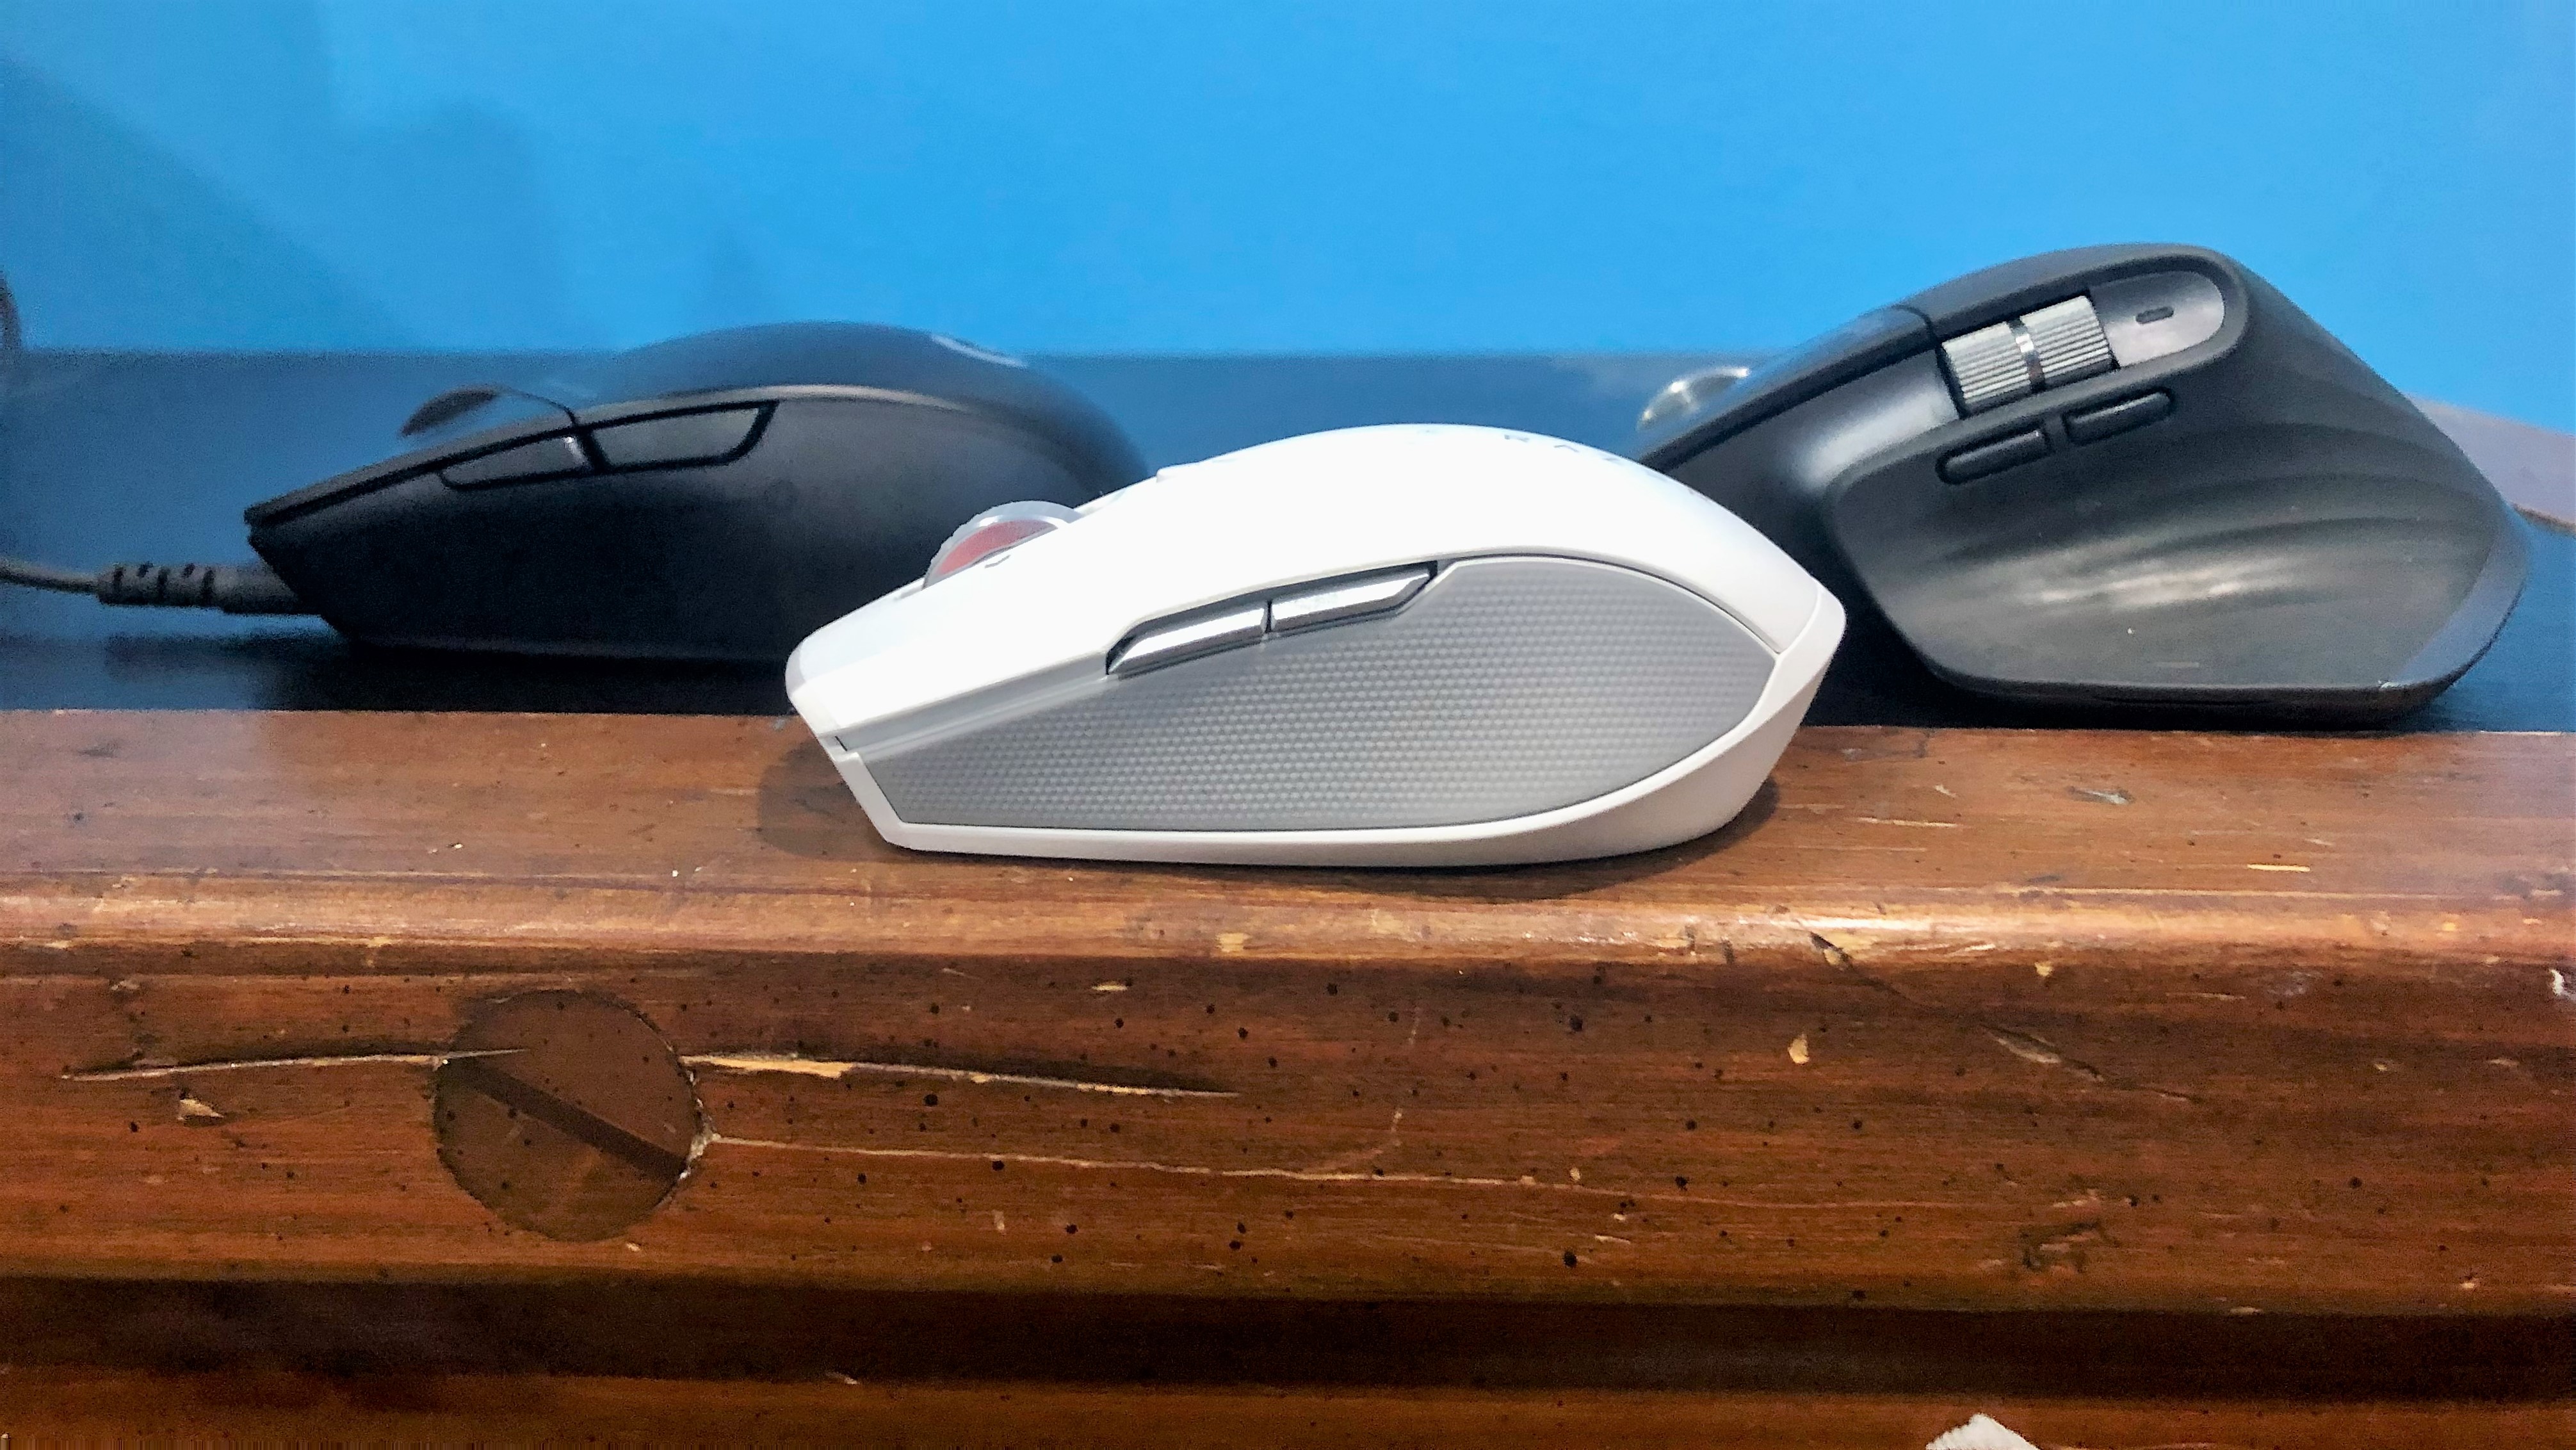 Want great PC mouse? these terms | Ars Technica